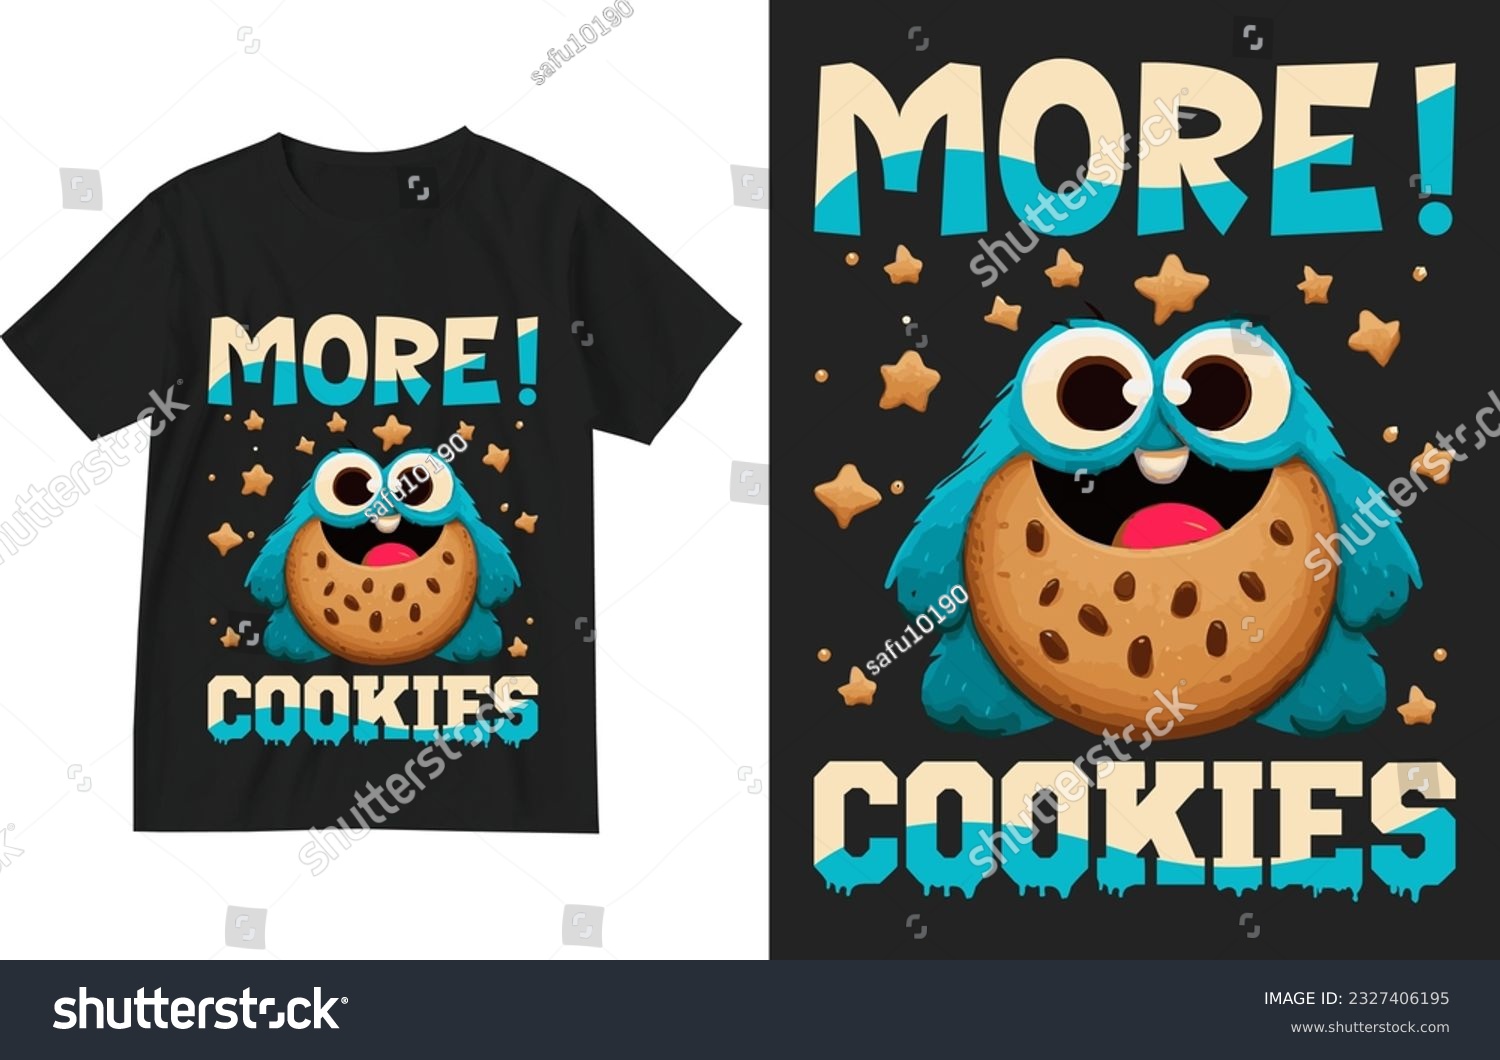 SVG of Cookie Monster More Cookies T-Shirt design illustration . Cookies t shirt design template . Cookies shirt . Cookie lover gift shirt .Cookie t-shirt . cookies lover tee illustration .Moster-cookie tee svg